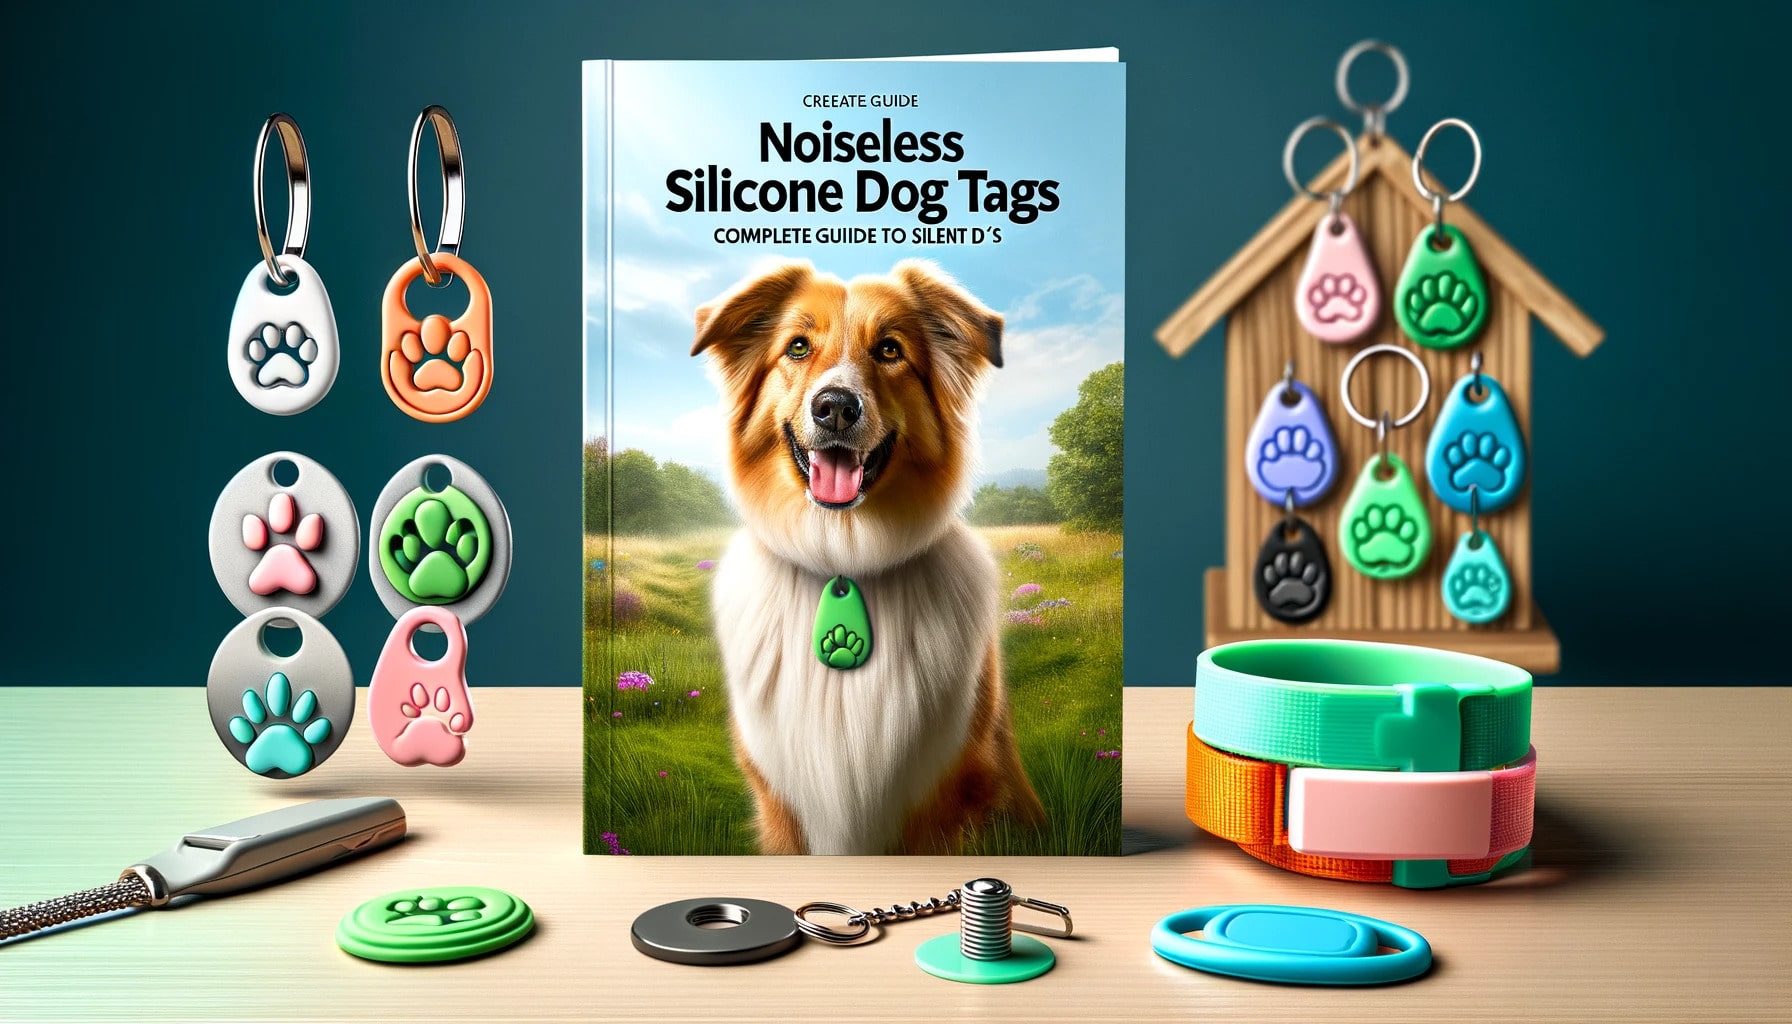 Noiseless Silicone Dog Tags: Complete Guide to Silent Pet IDs